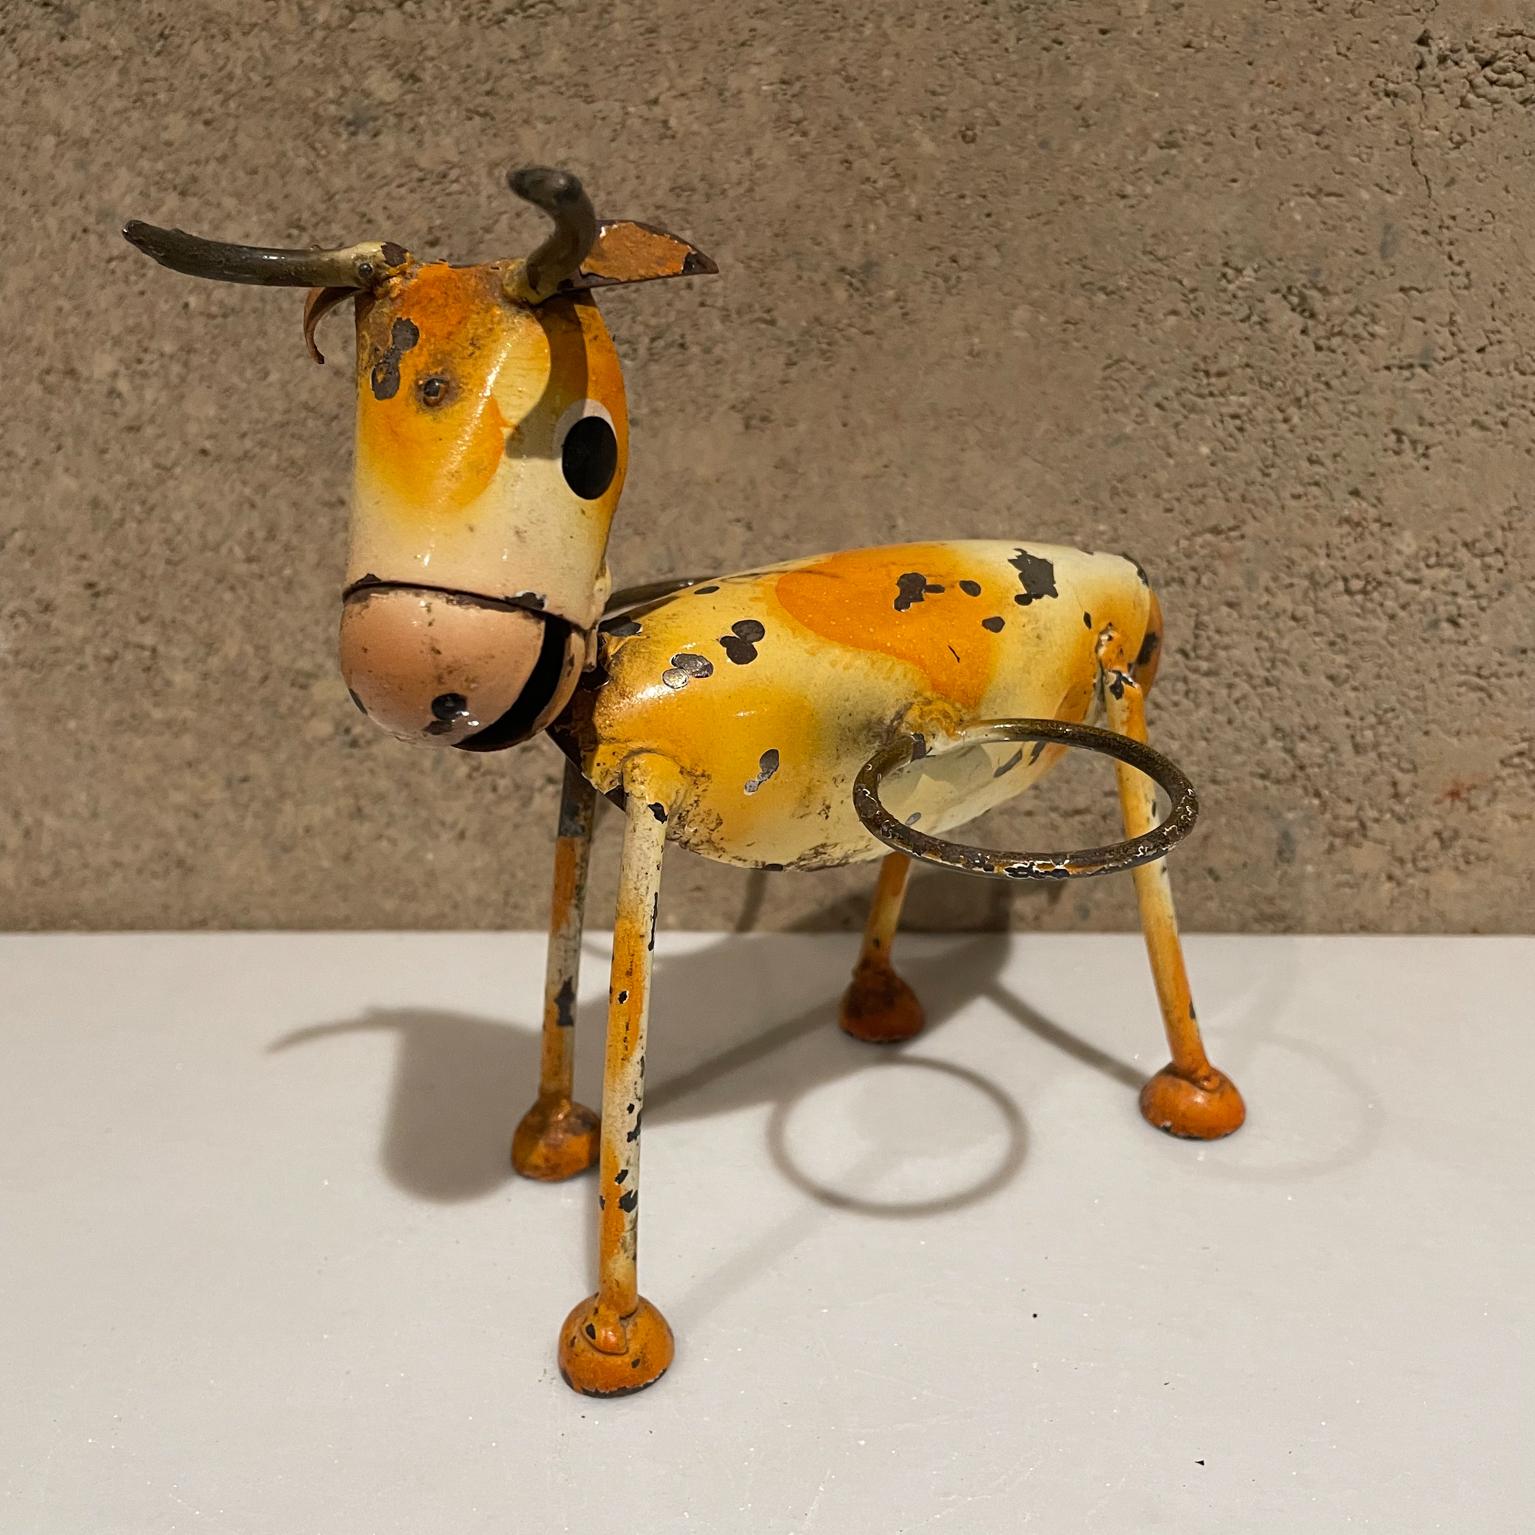 1970s Style Manuel Felguerez Modernist Yellow Donkey Valet Caddy Viva Mexico In Good Condition For Sale In Chula Vista, CA